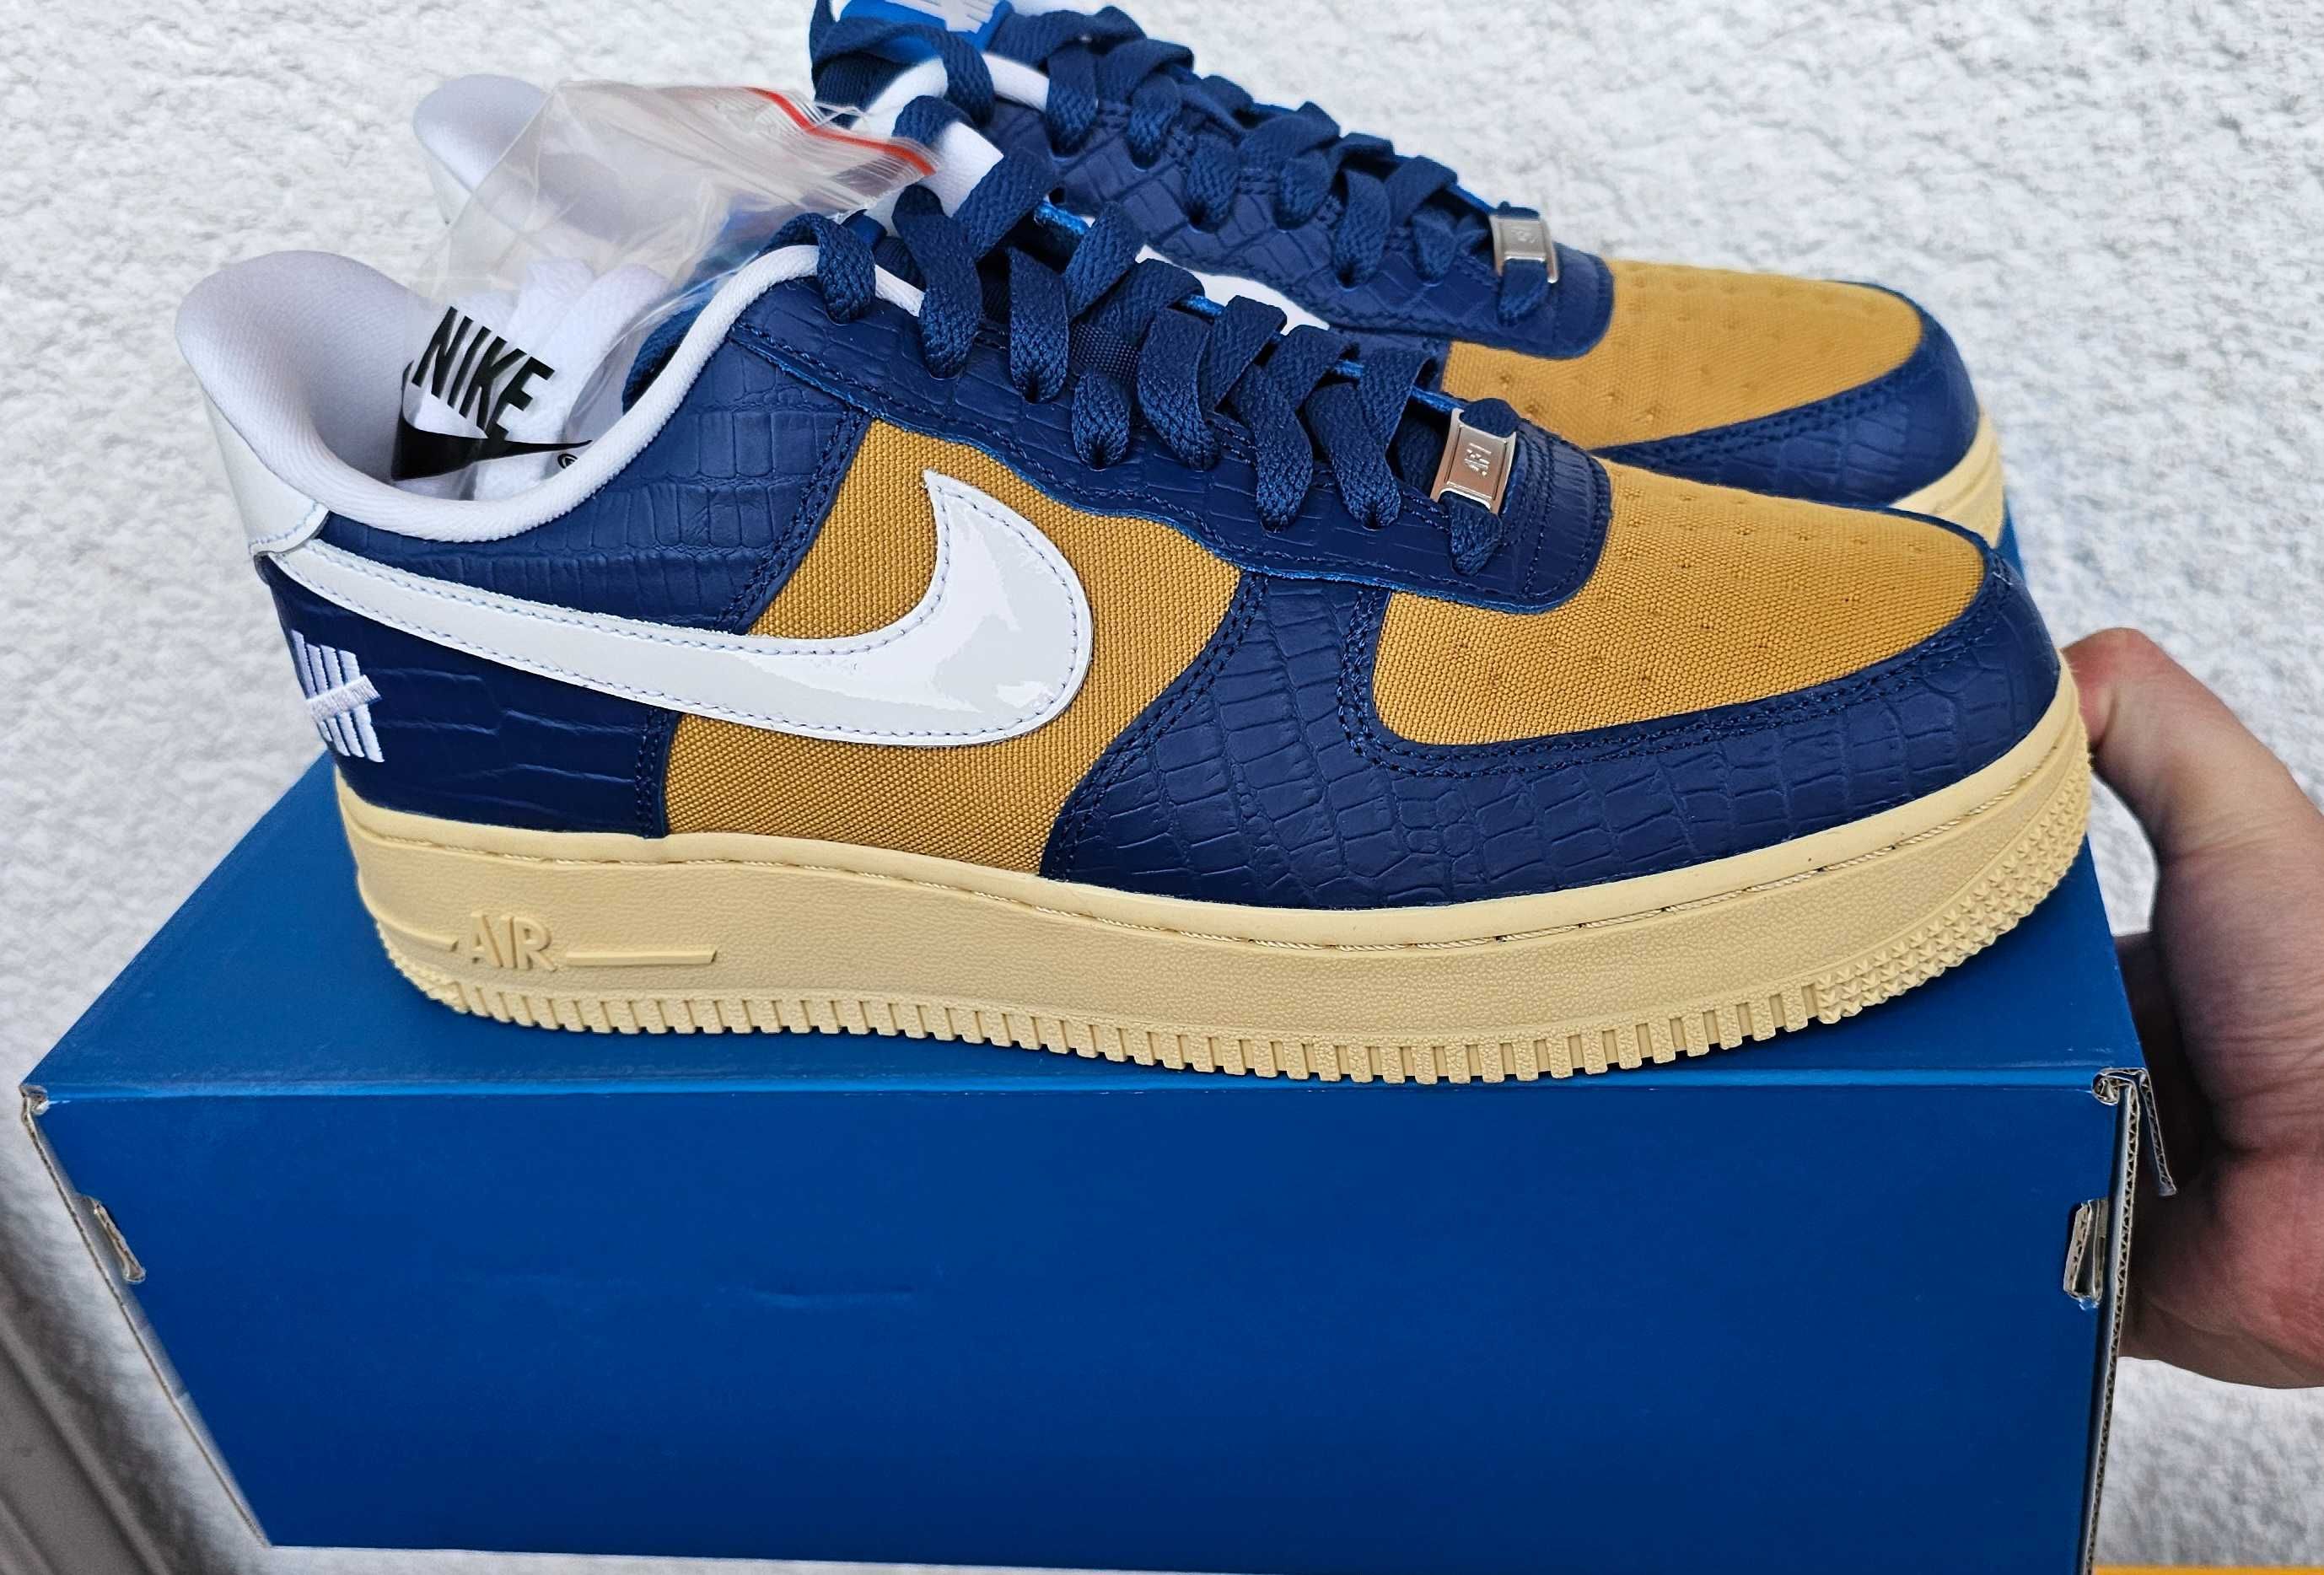 Air Force 1 UNDFTD "5 ON IT"